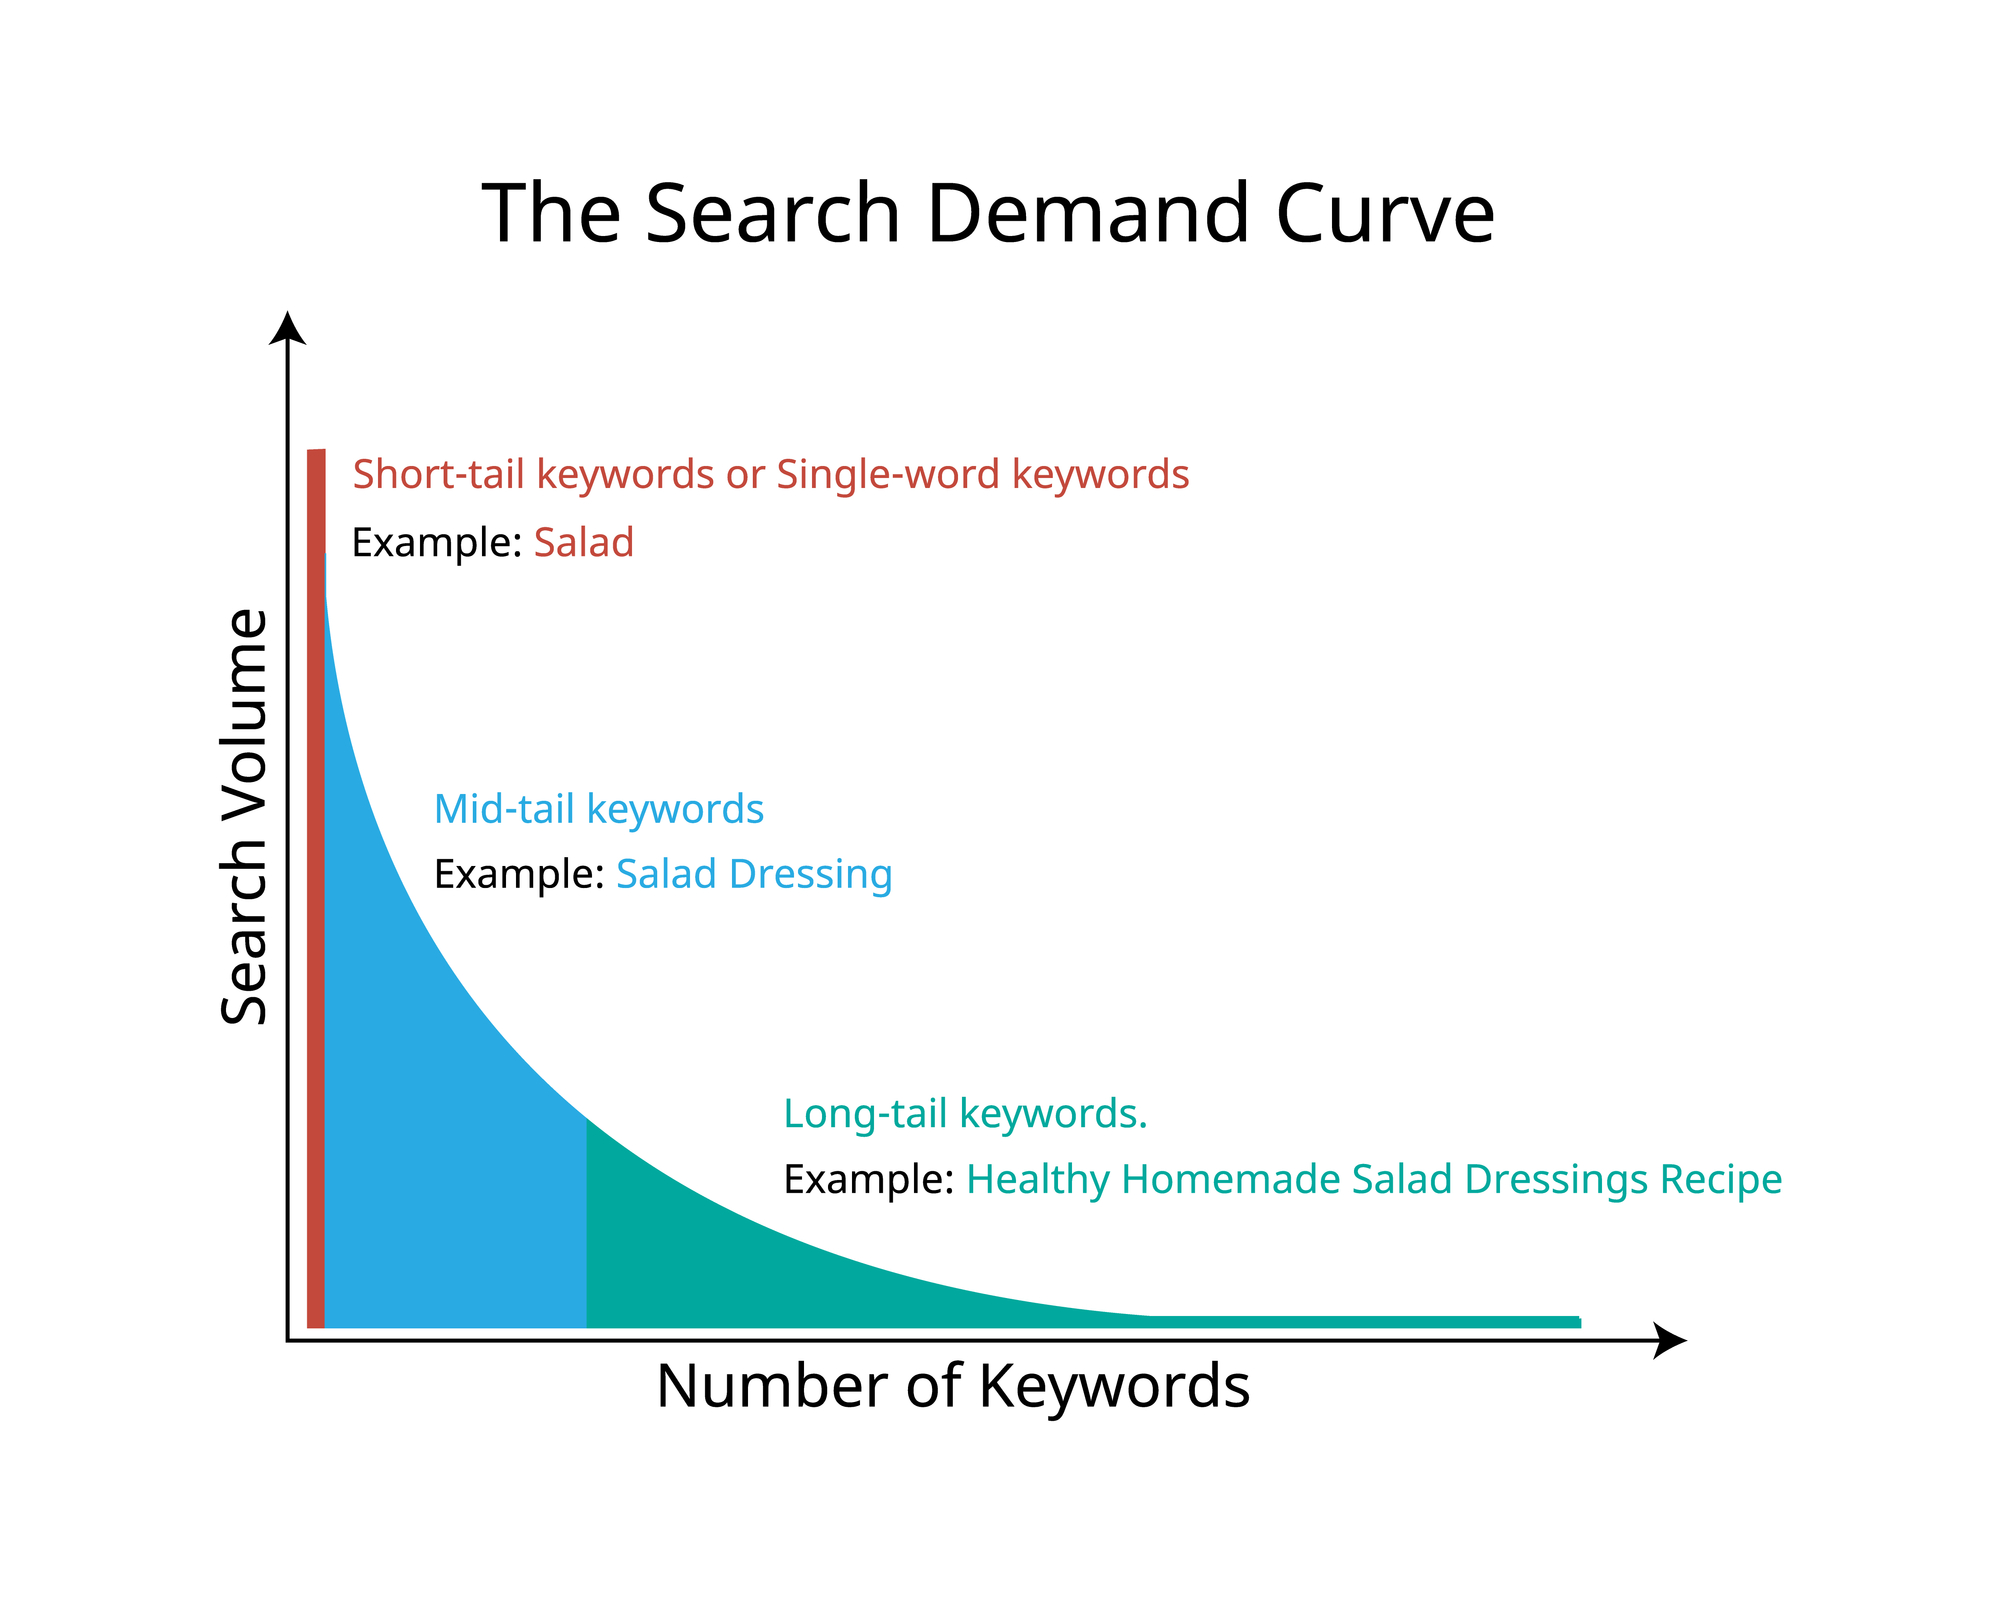 Long tail keywords are longer and more specific phrases visitors are more likely to use